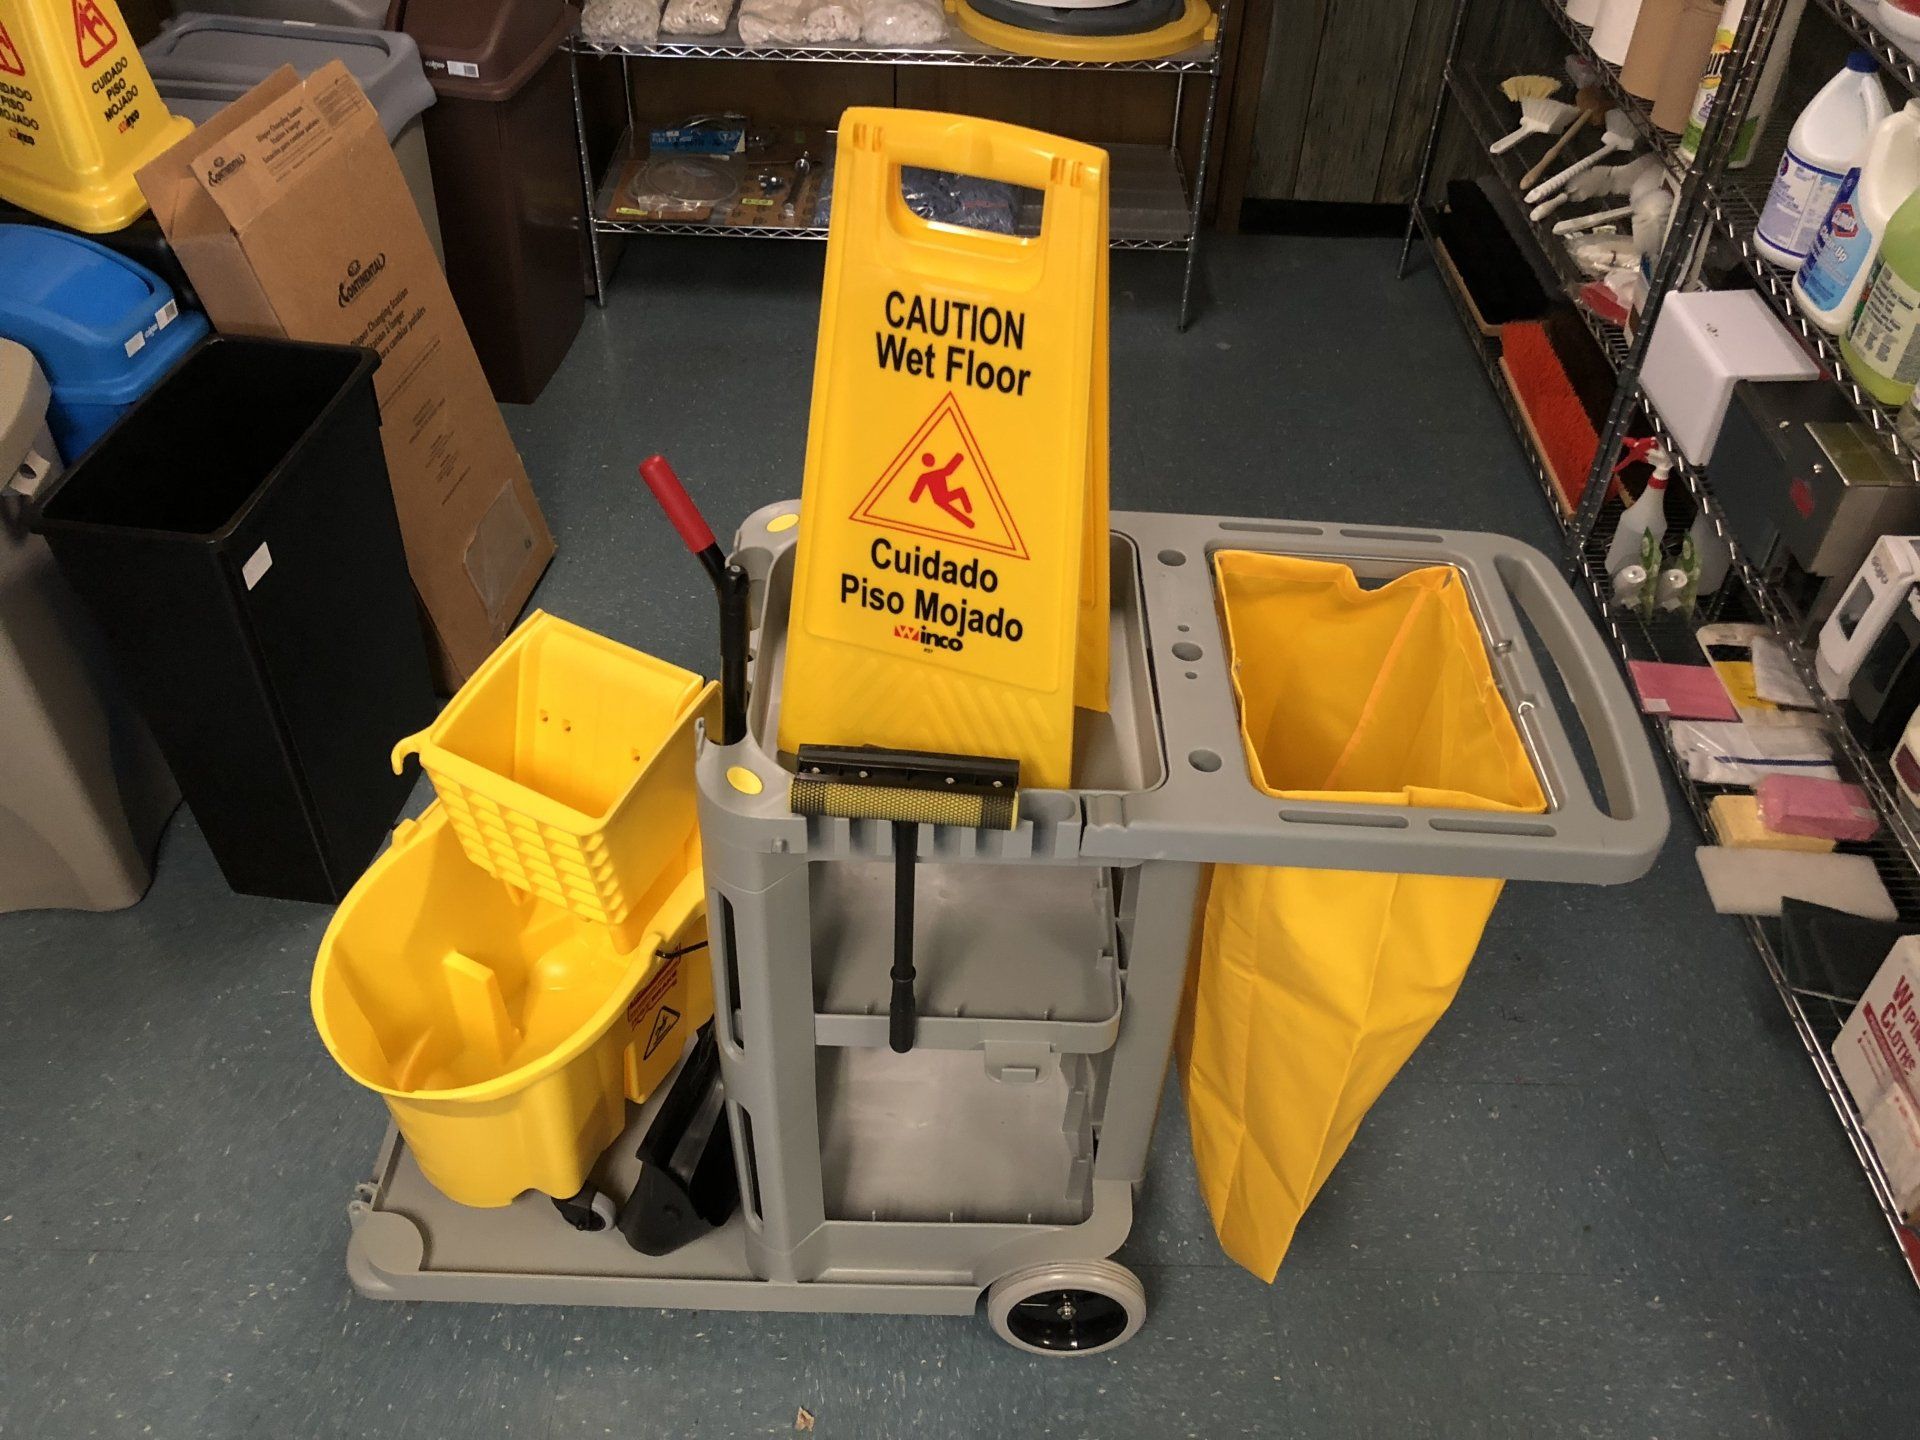 A cleaning cart with a yellow sign that says caution wet floor